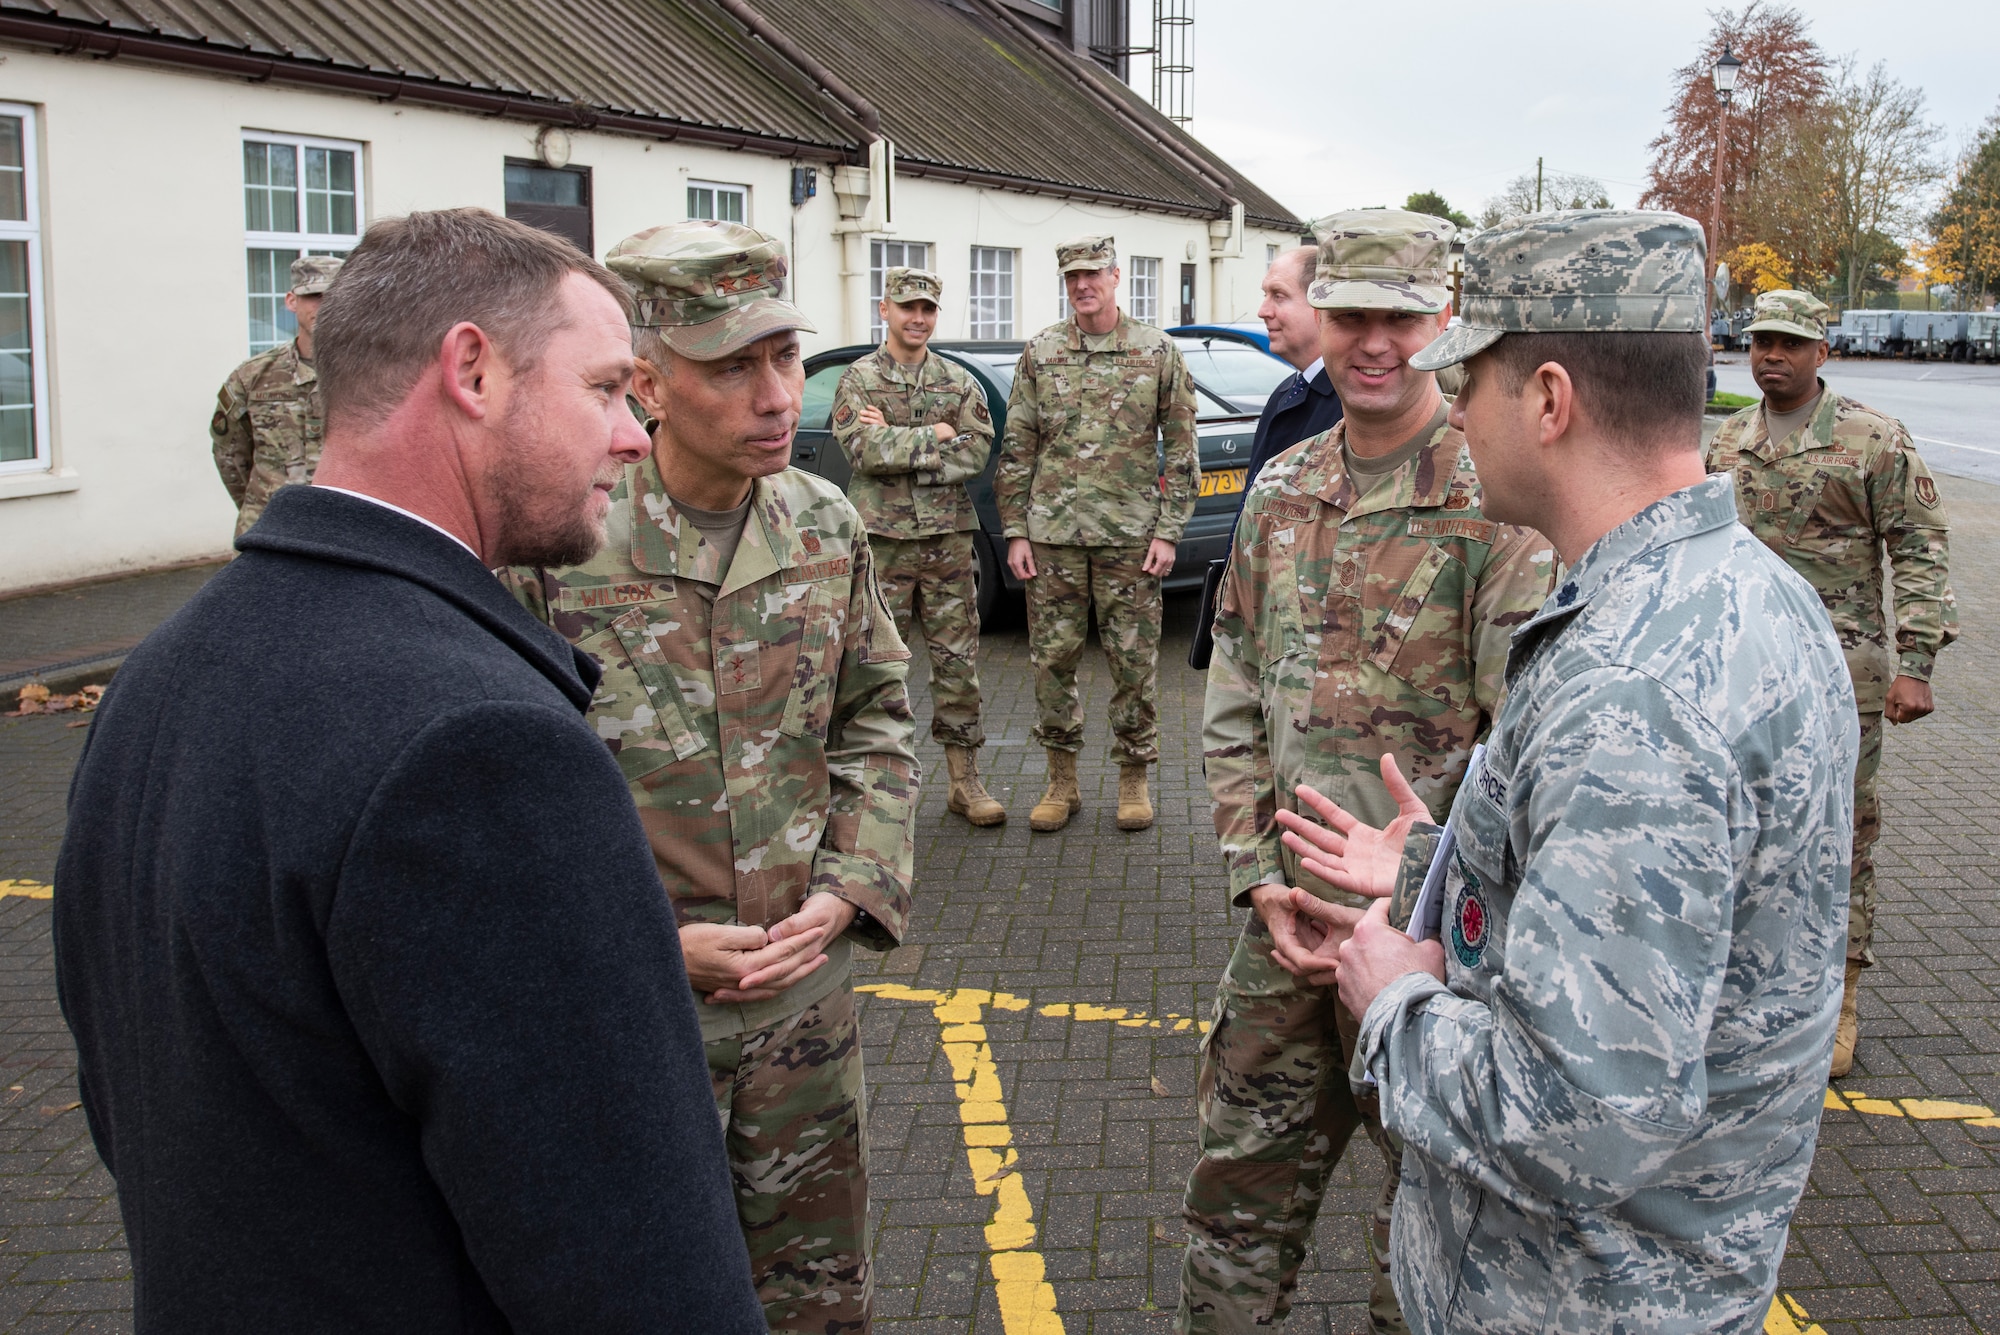 Maj. Gen. John Wilcox, Air Force Installation and Mission Support Center commander, and Chief Master Sgt. Edwin Ludwigsen, AFIMSC command chief master sergeant, speak with Airmen outside the aerospace ground equipment building Nov. 22, 2019, at RAF Mildenhall, England. The AFIMSC provides base communications, civil engineering, security forces and logistics support that assists Team Mildenhall in fulfilling its mission sets. (U.S. Air Force photo by Airman 1st Class Joseph Barron)